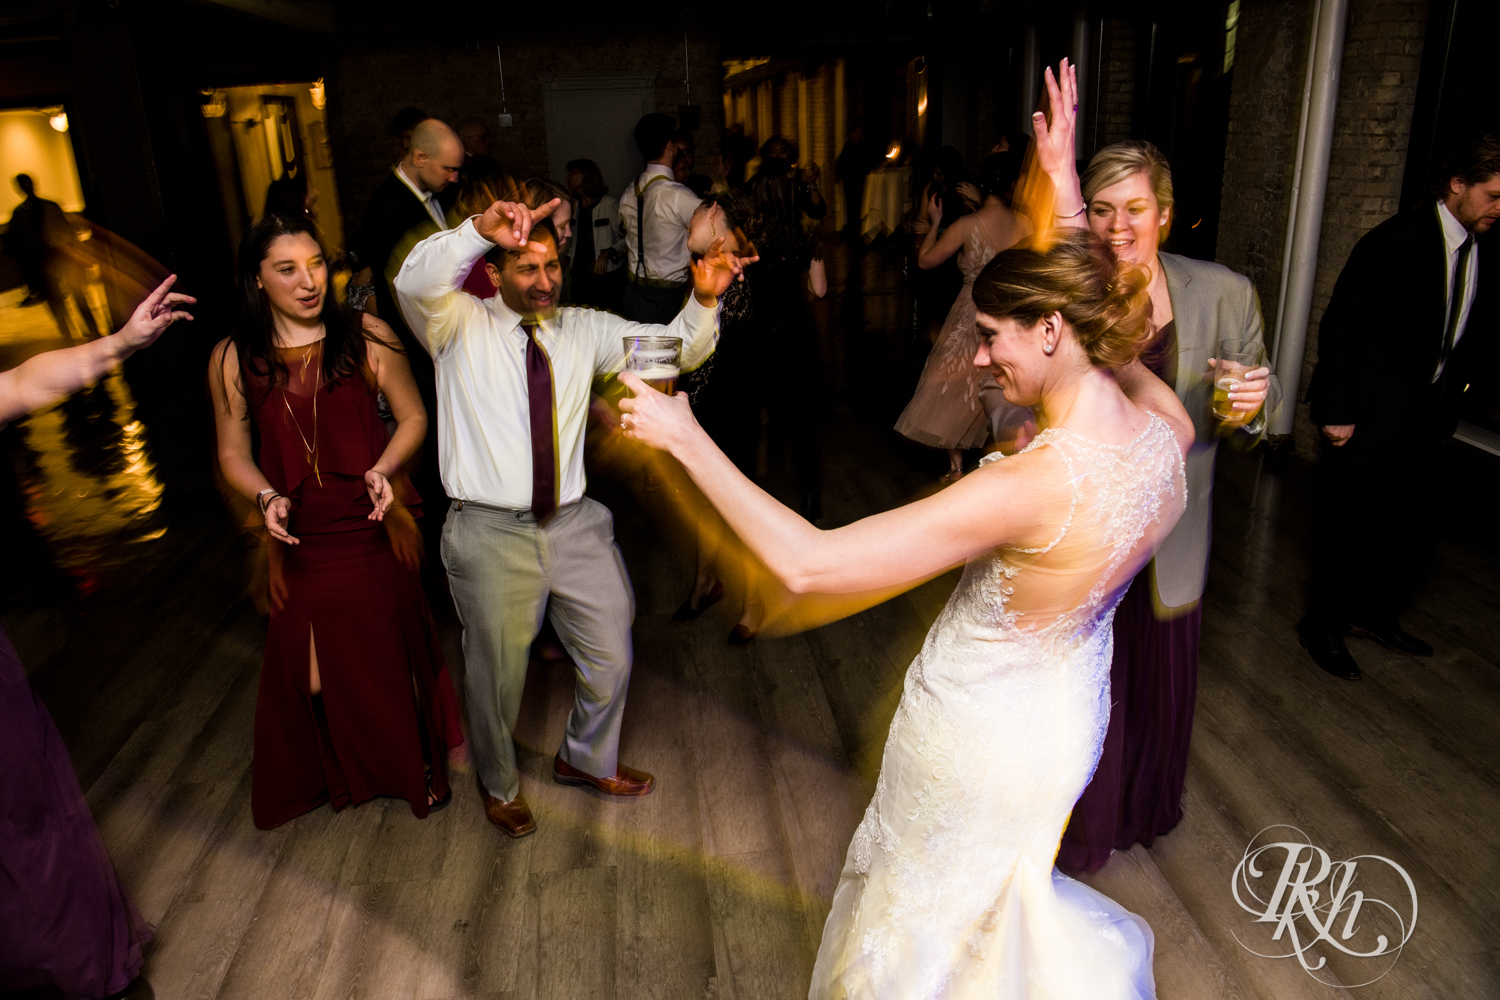 Guests dance at wedding reception at Lumber Exchange Event Center in Minneapolis, Minnesota.